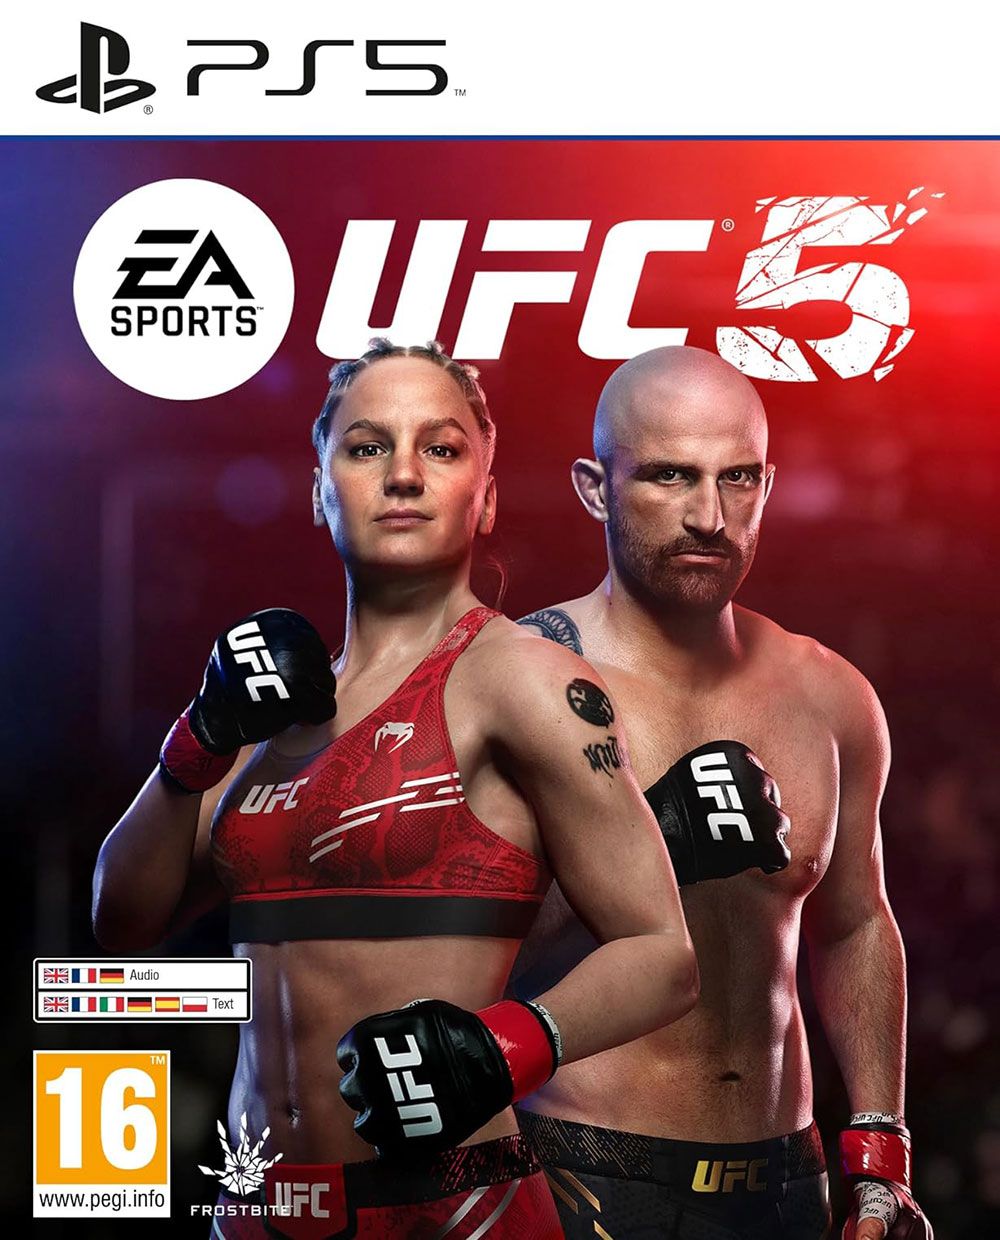 EA Sports UFC 5 (PS5)(New) Buy from Pwned Games with confidence